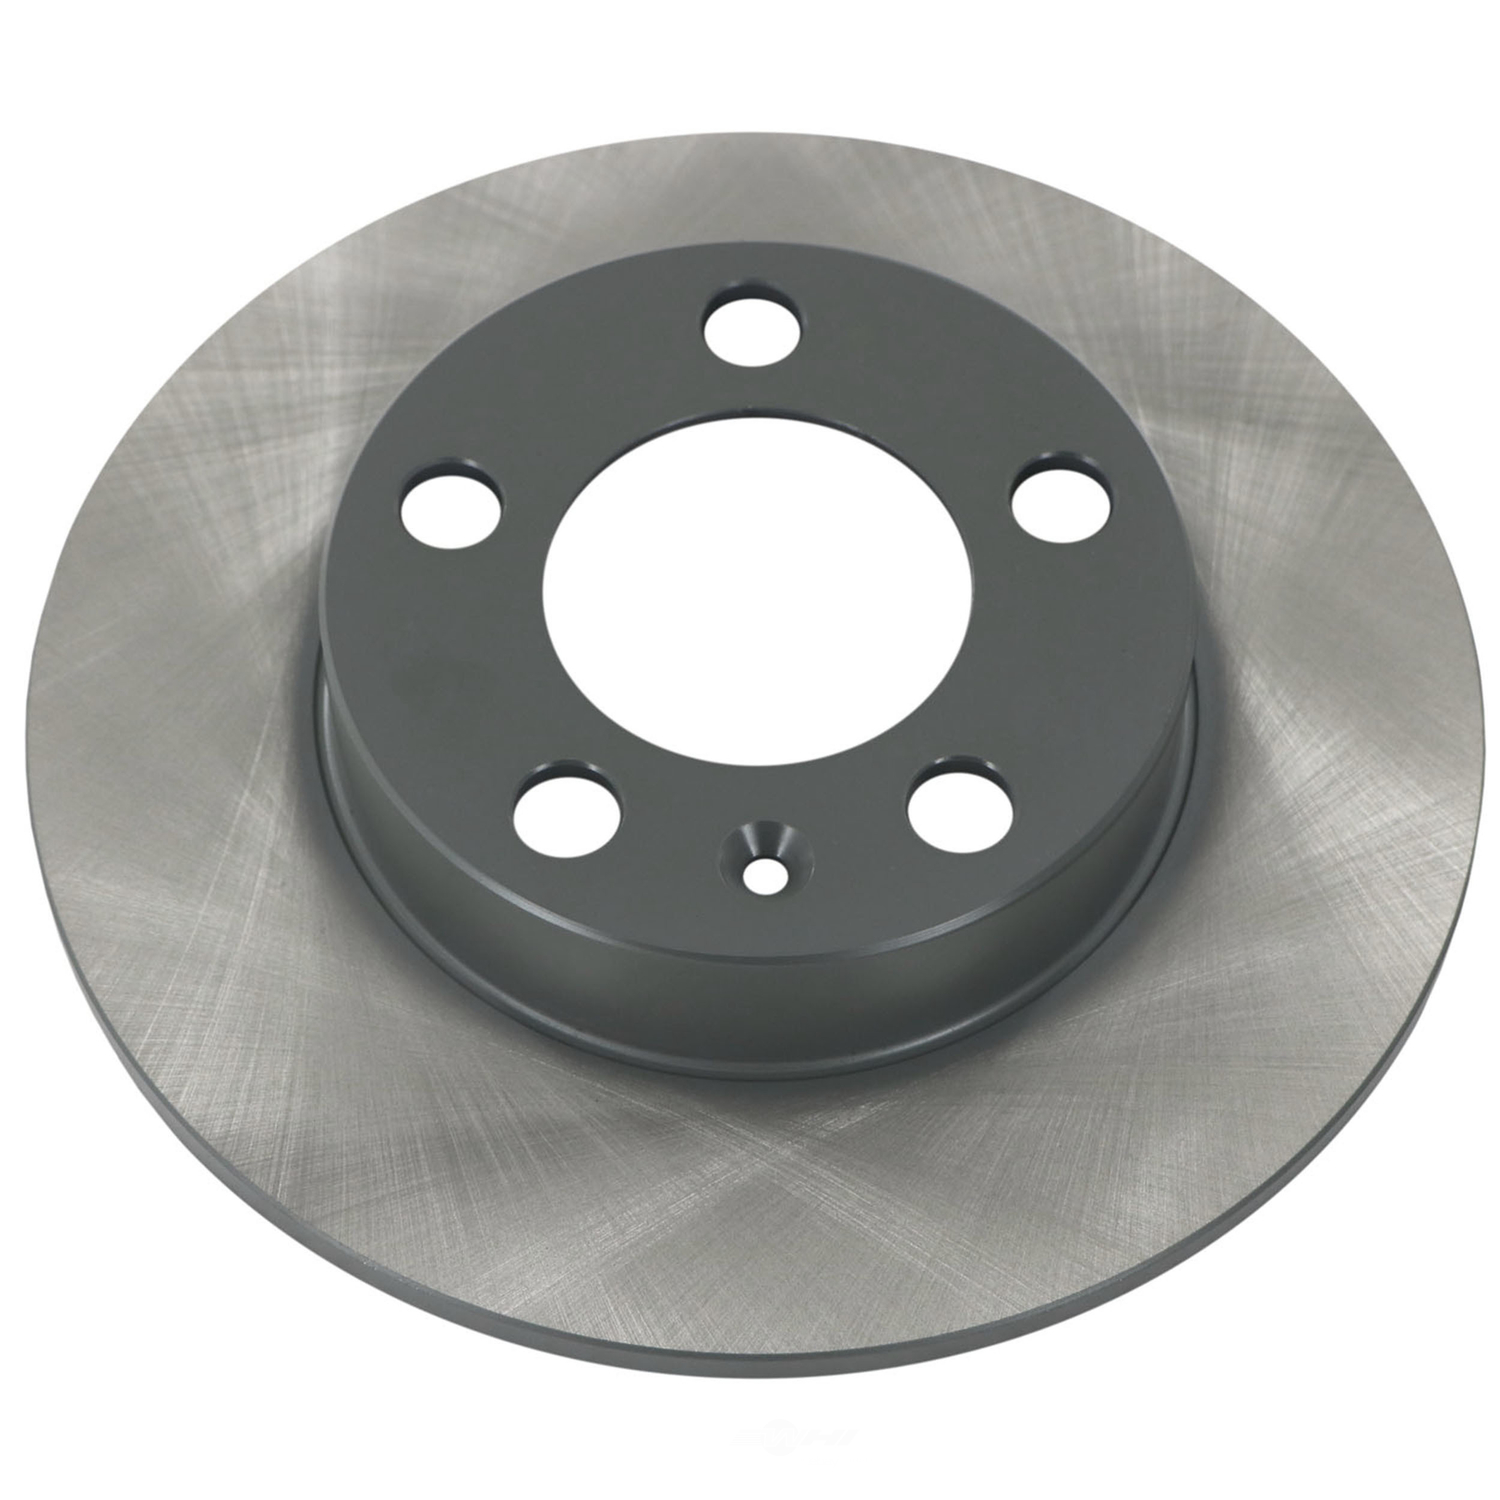 WINHERE BRAKE PARTS INC. - Standard Replacement Disc Brake Rotor - Painted - FPI 661309